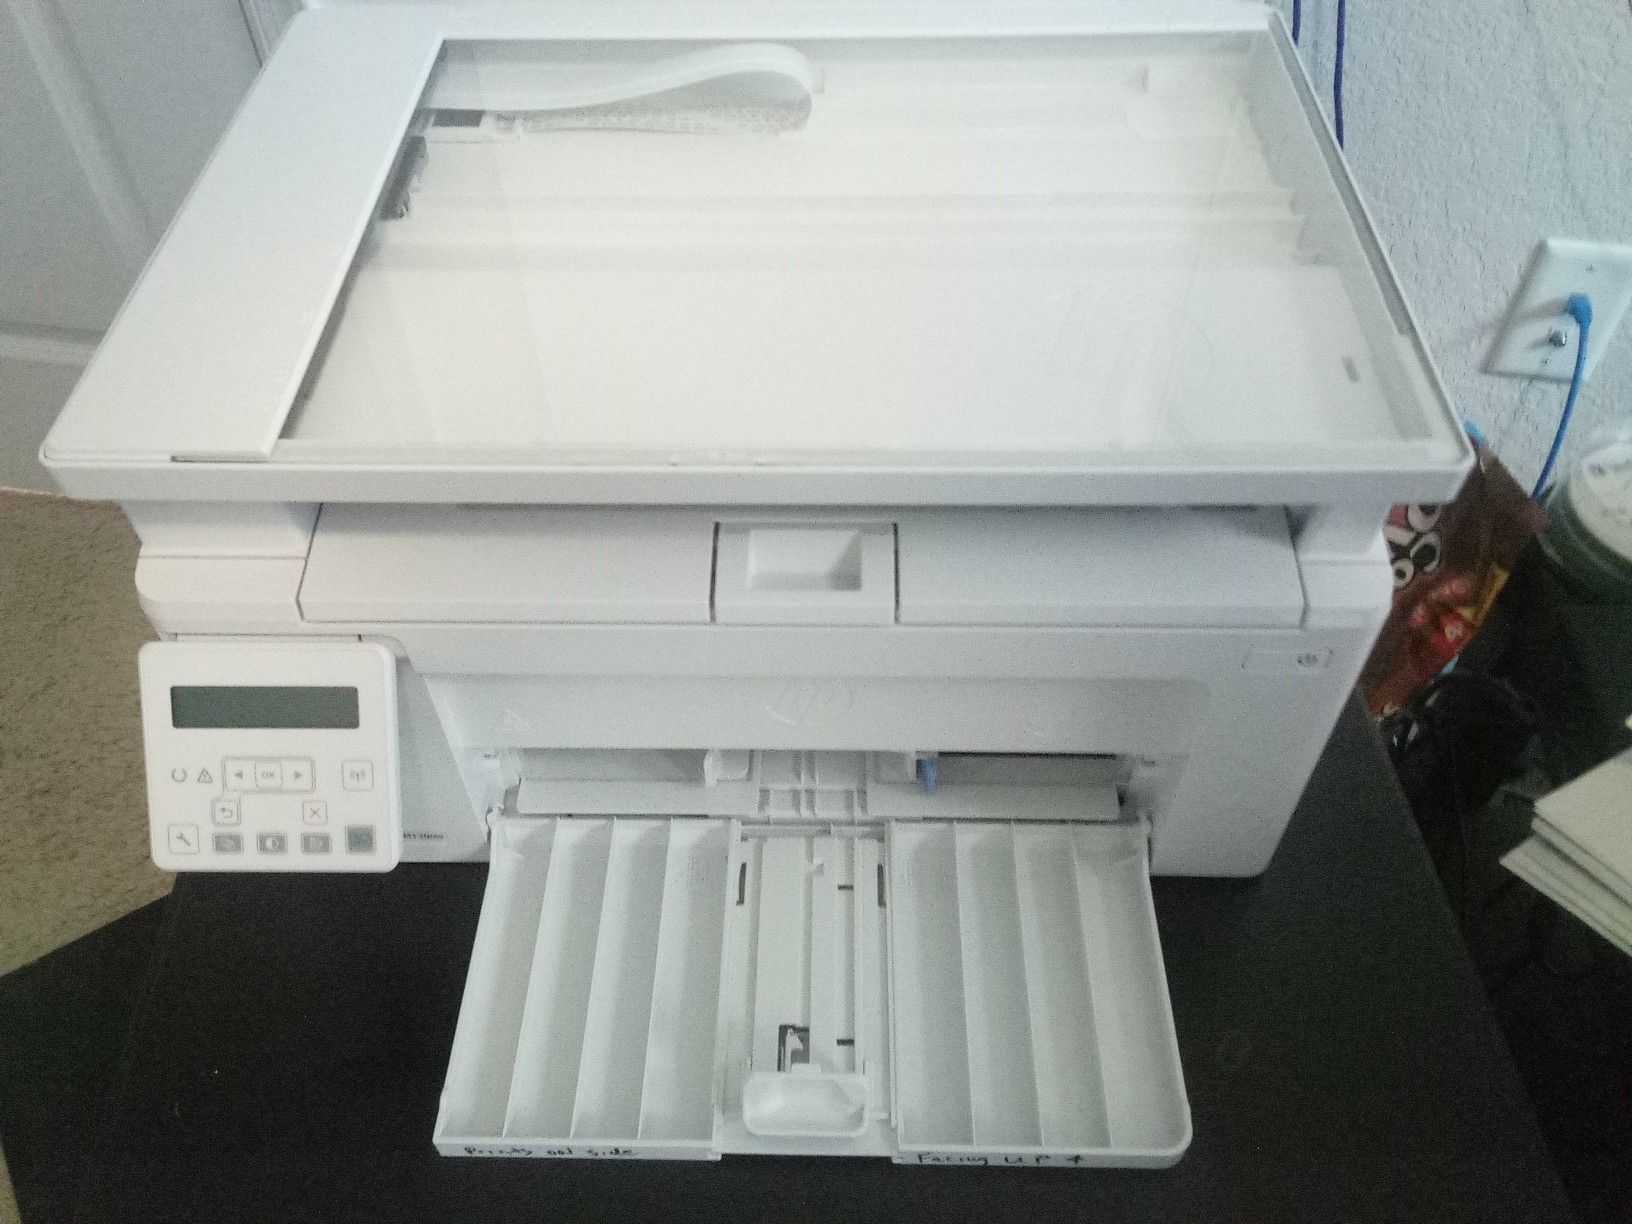 Hp laser printer and scanner, does wireless and wired lan and usb